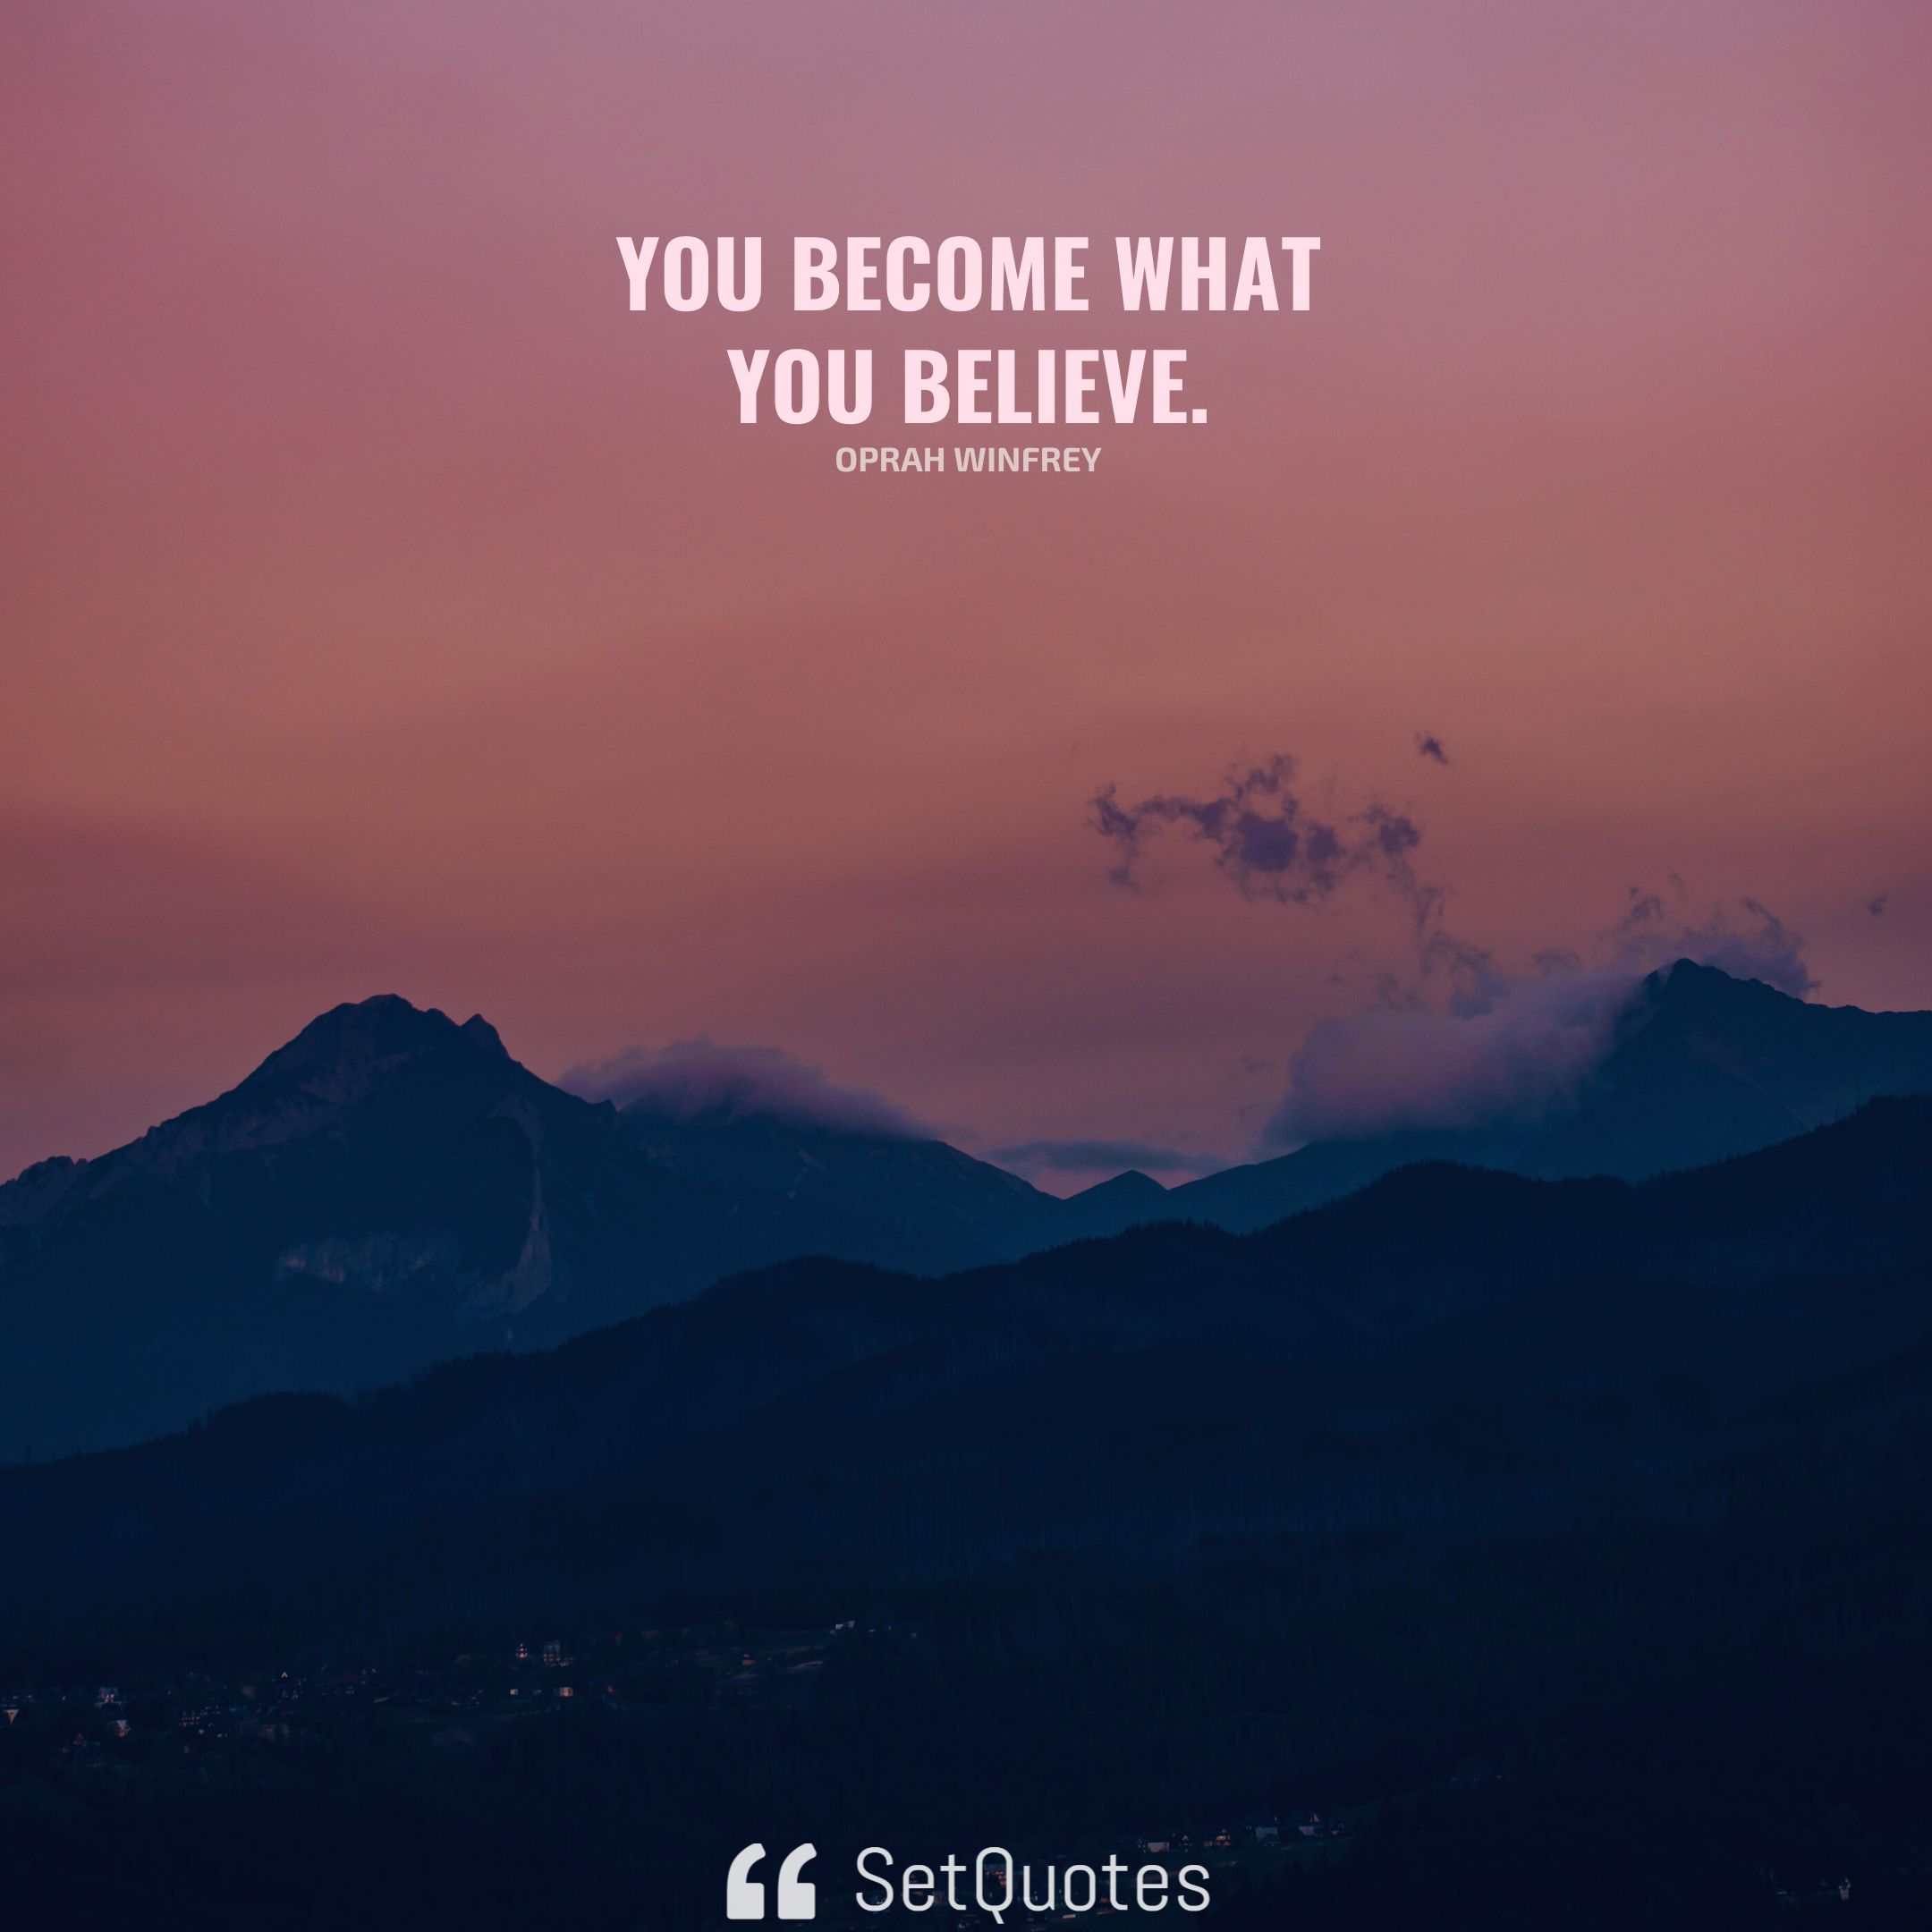 You become what you believe. - Oprah Winfrey - SetQuotes